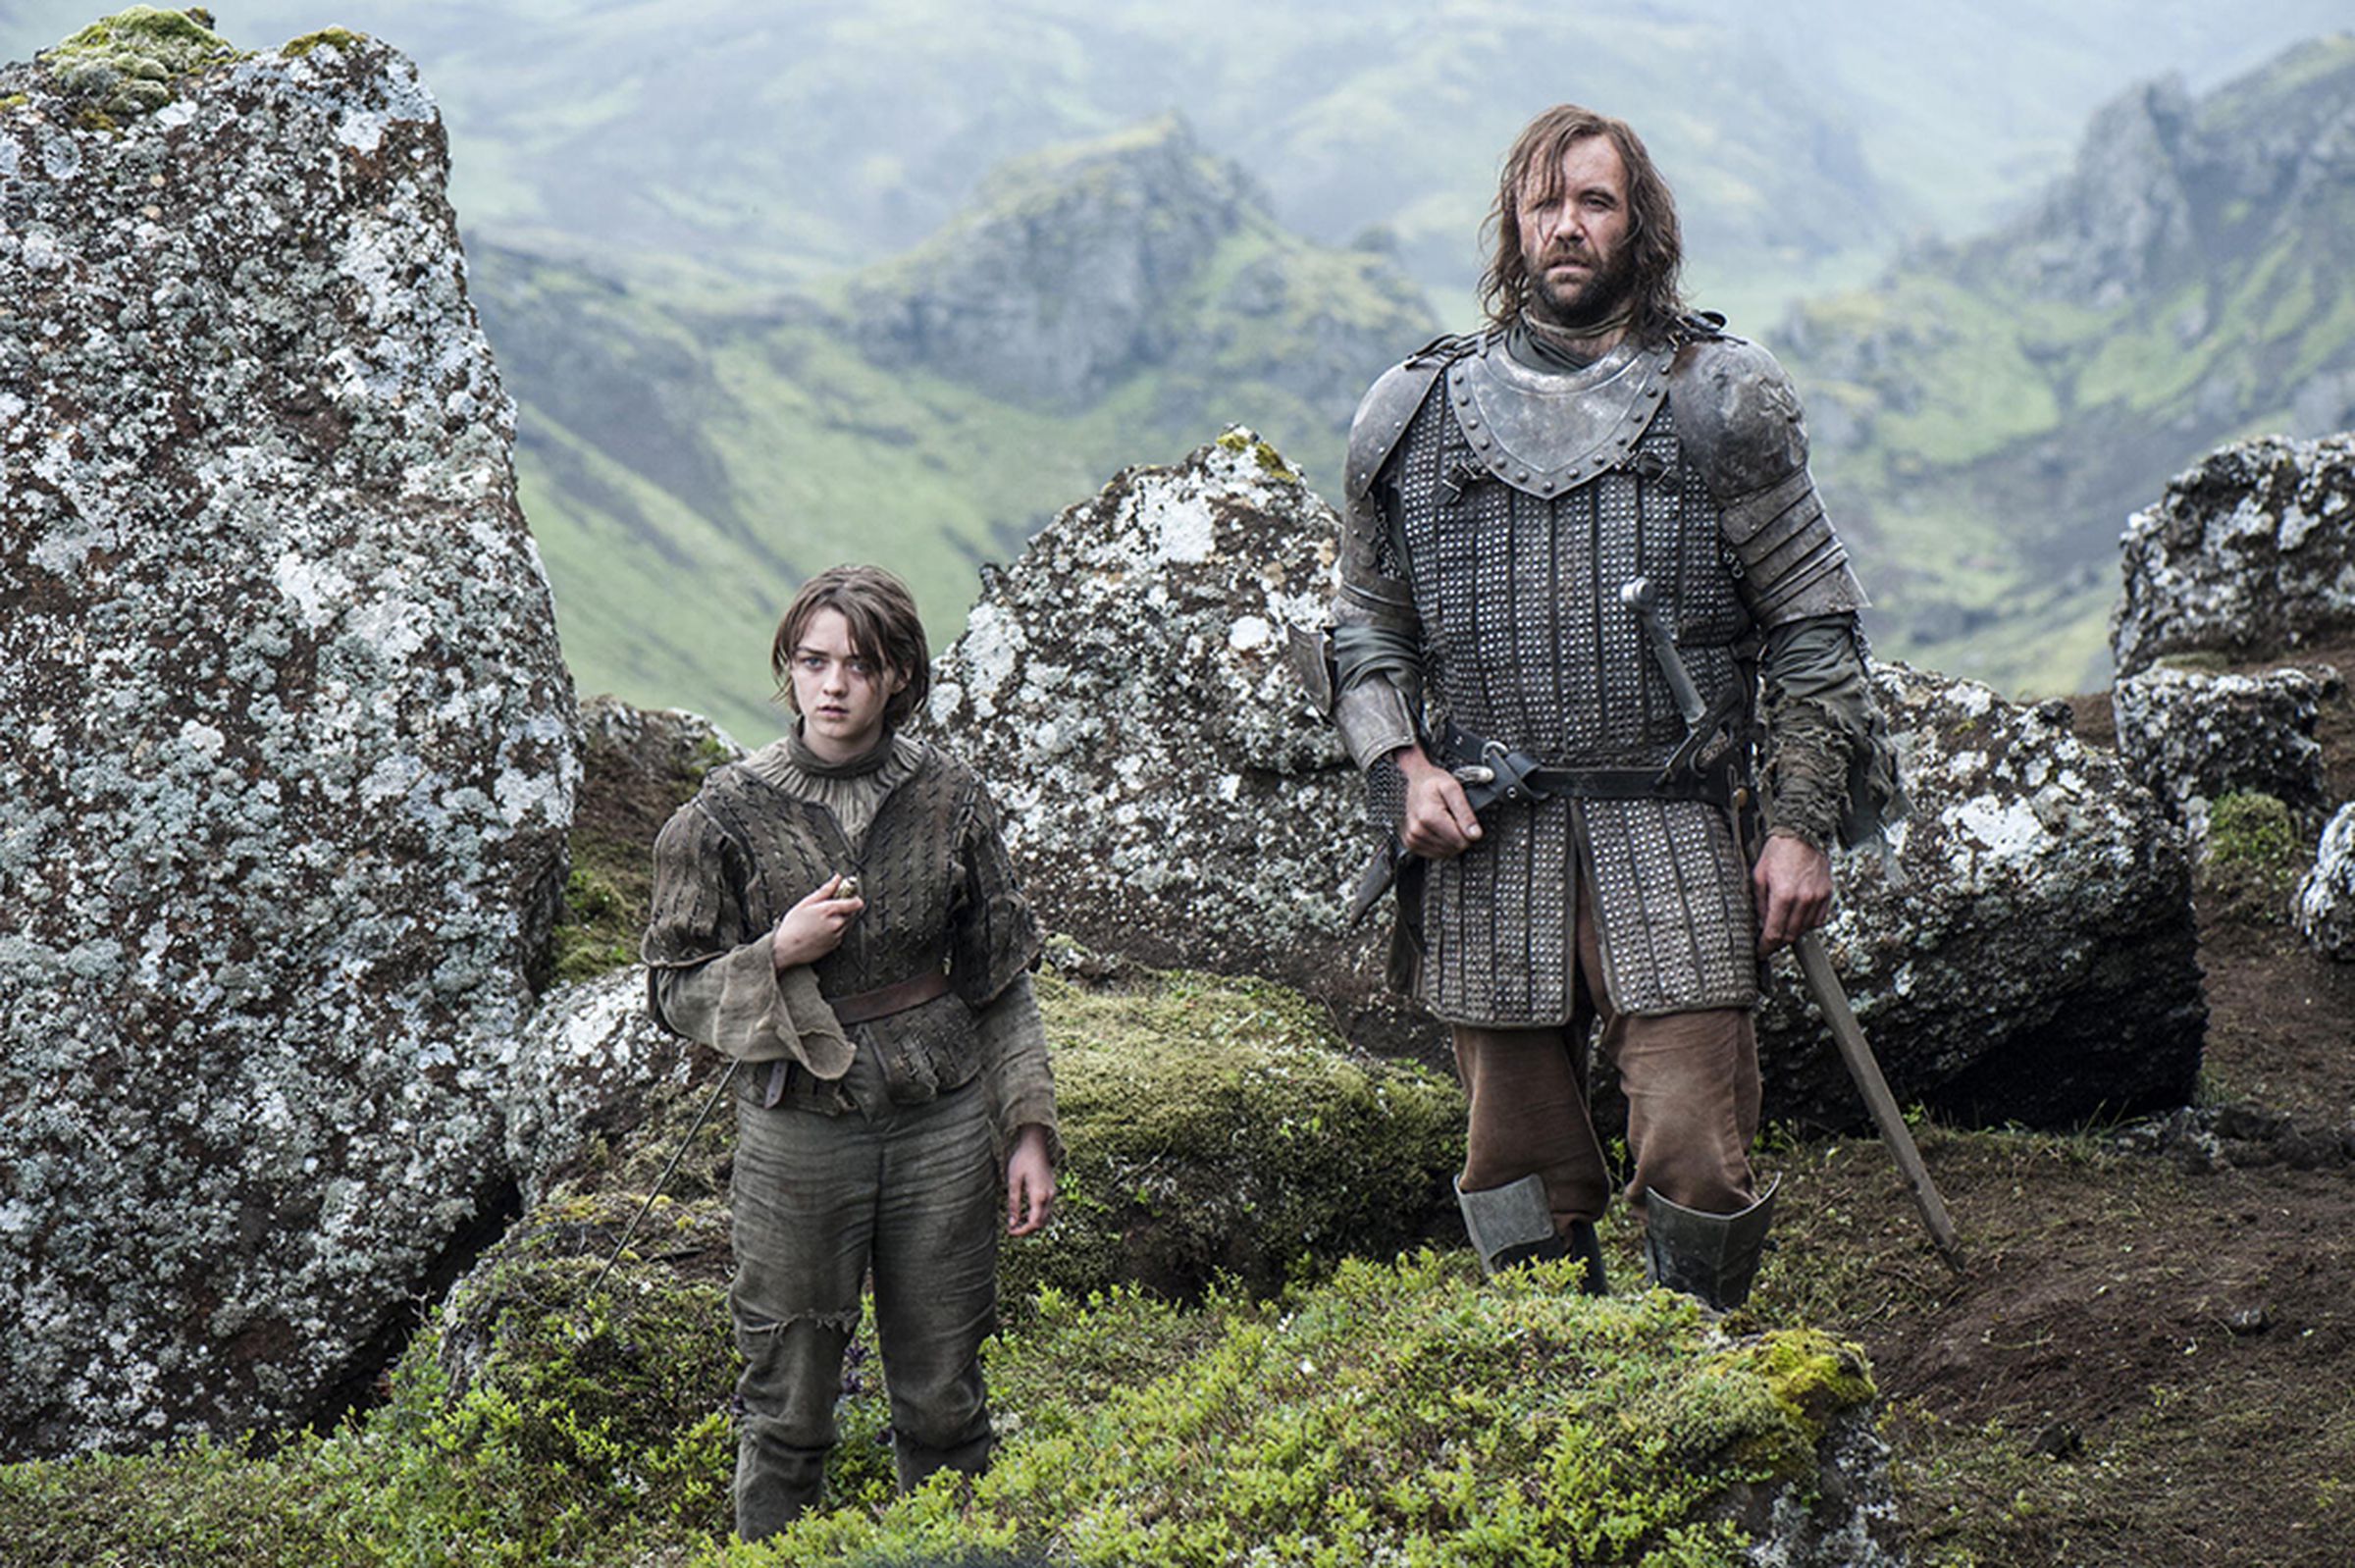 Game of Thrones Season 4 Episode 10 promotional still (HBO)